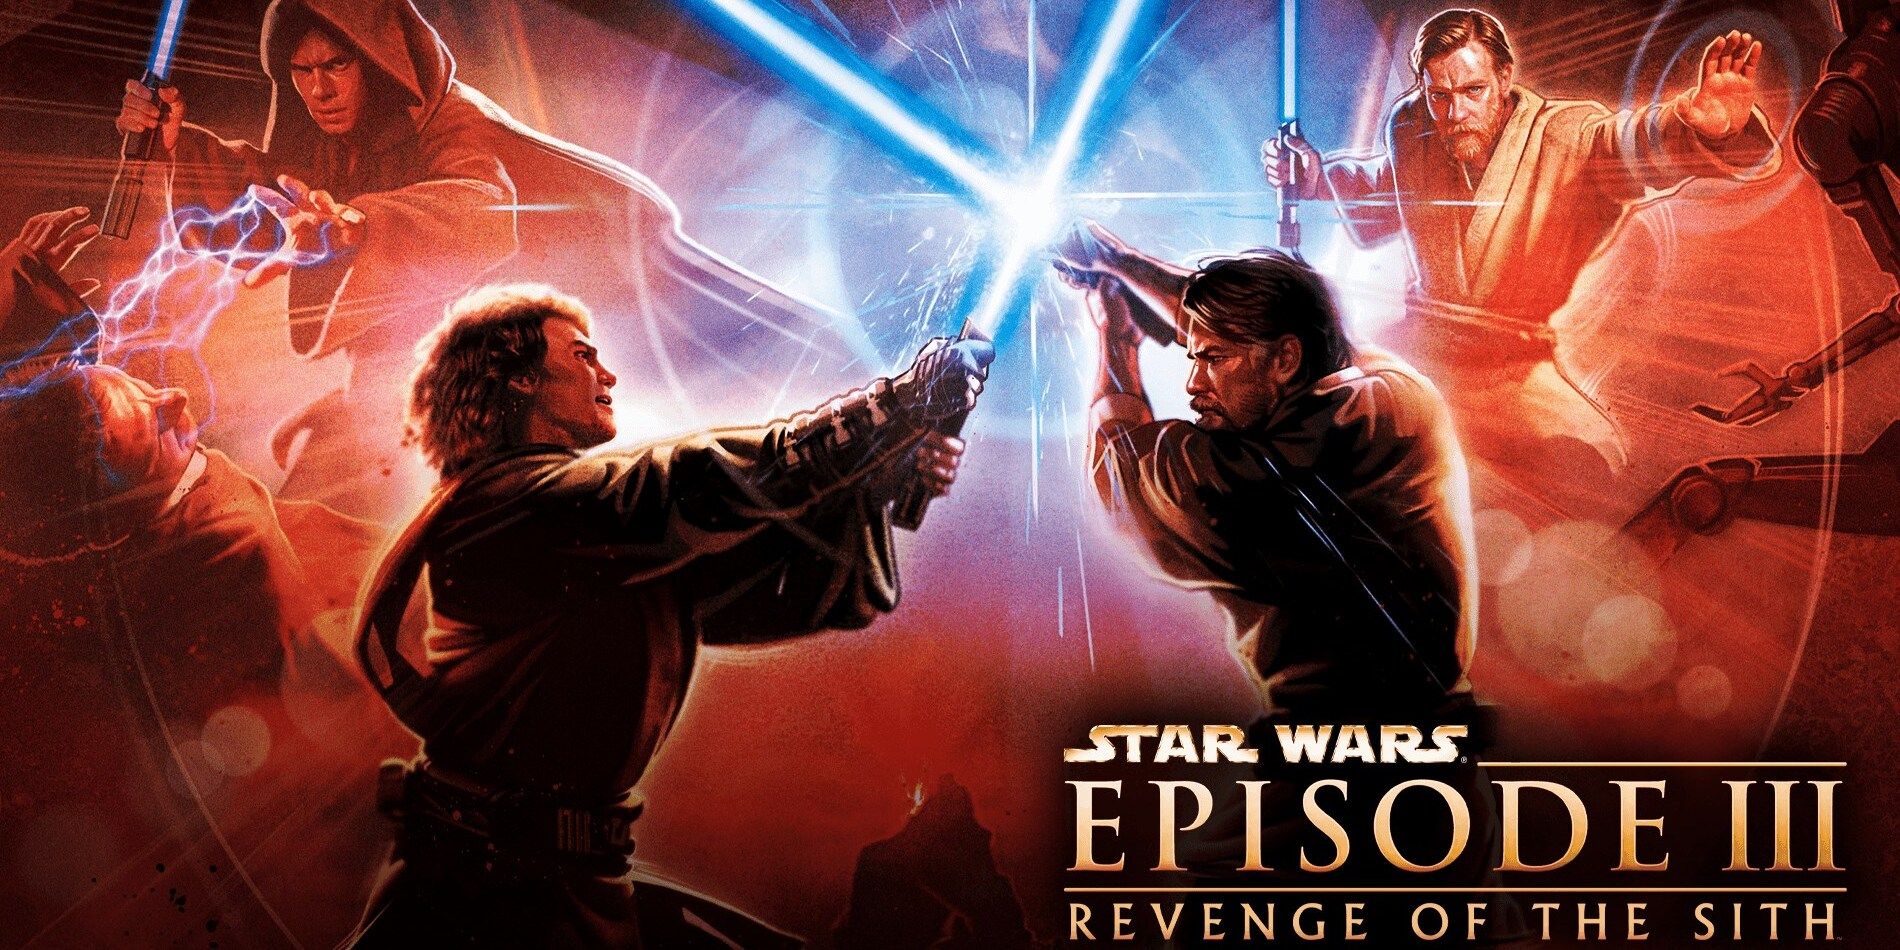 star-wars-revenge-of-the-sith-is-the-best-example-of-a-good-movie-tie